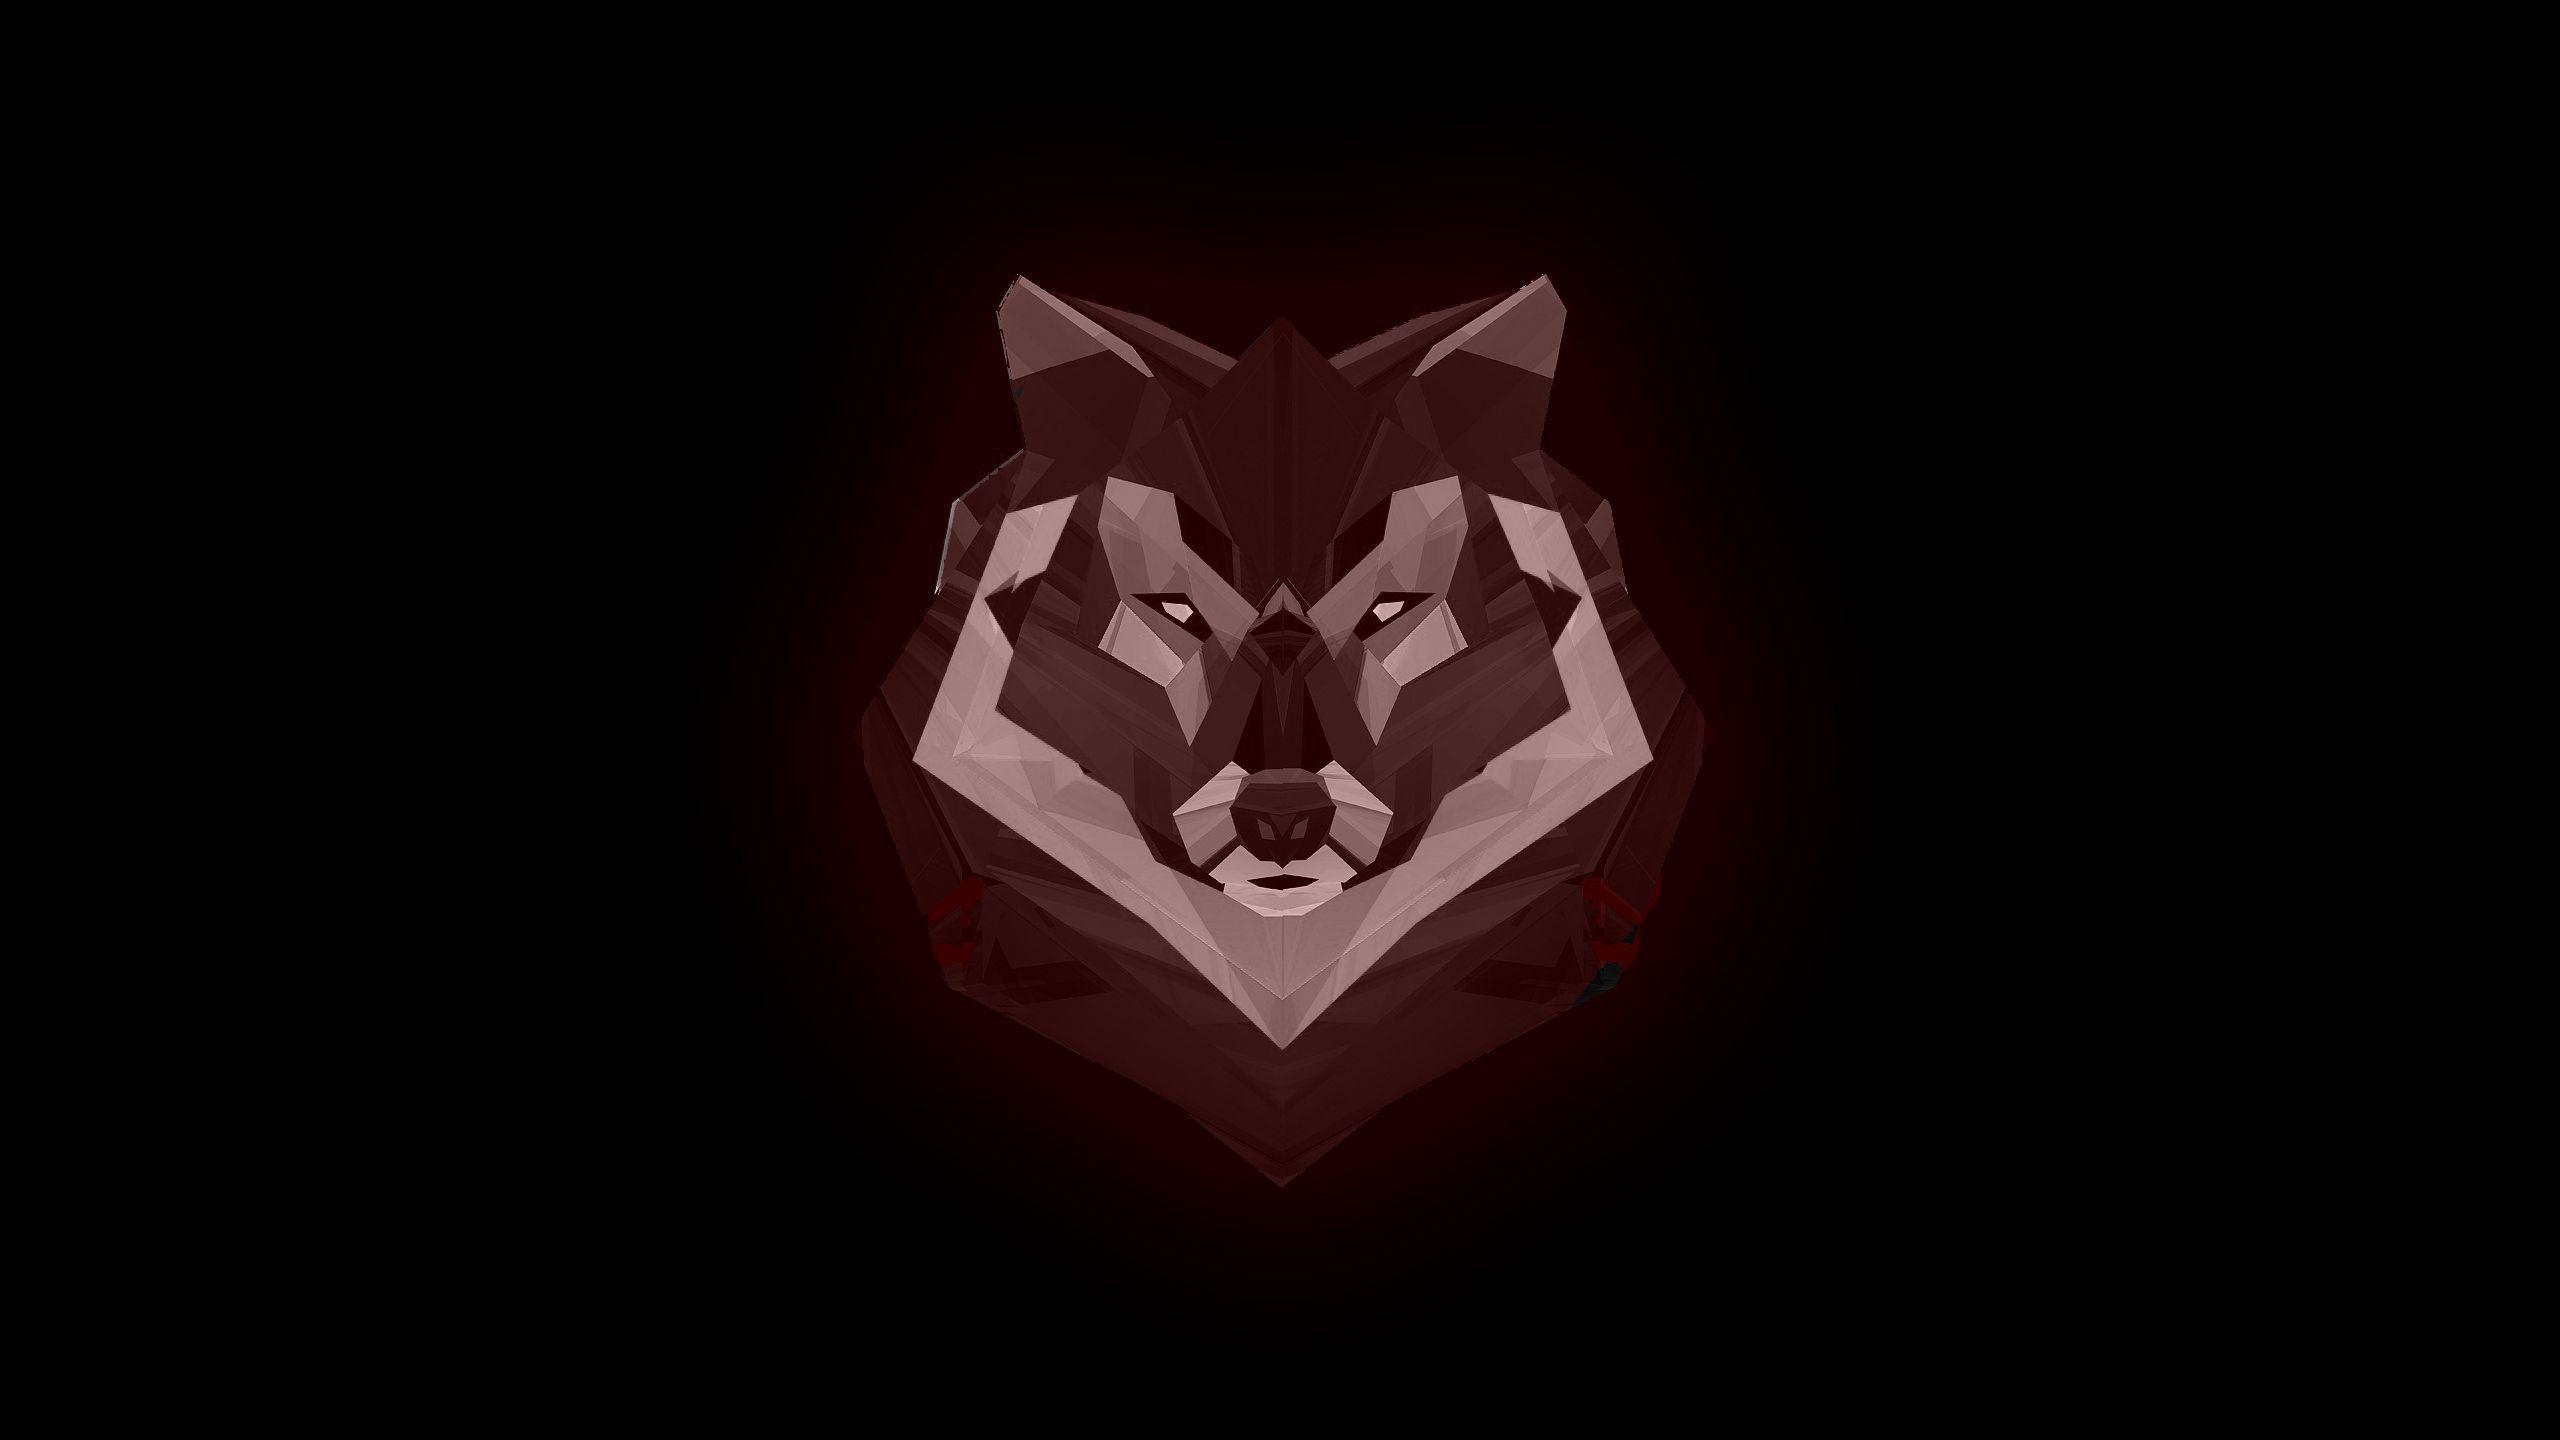 Animated Wolf Logo - Animated Wolf Wallpapers Widescreen » Download Wallpaper Laptop HD